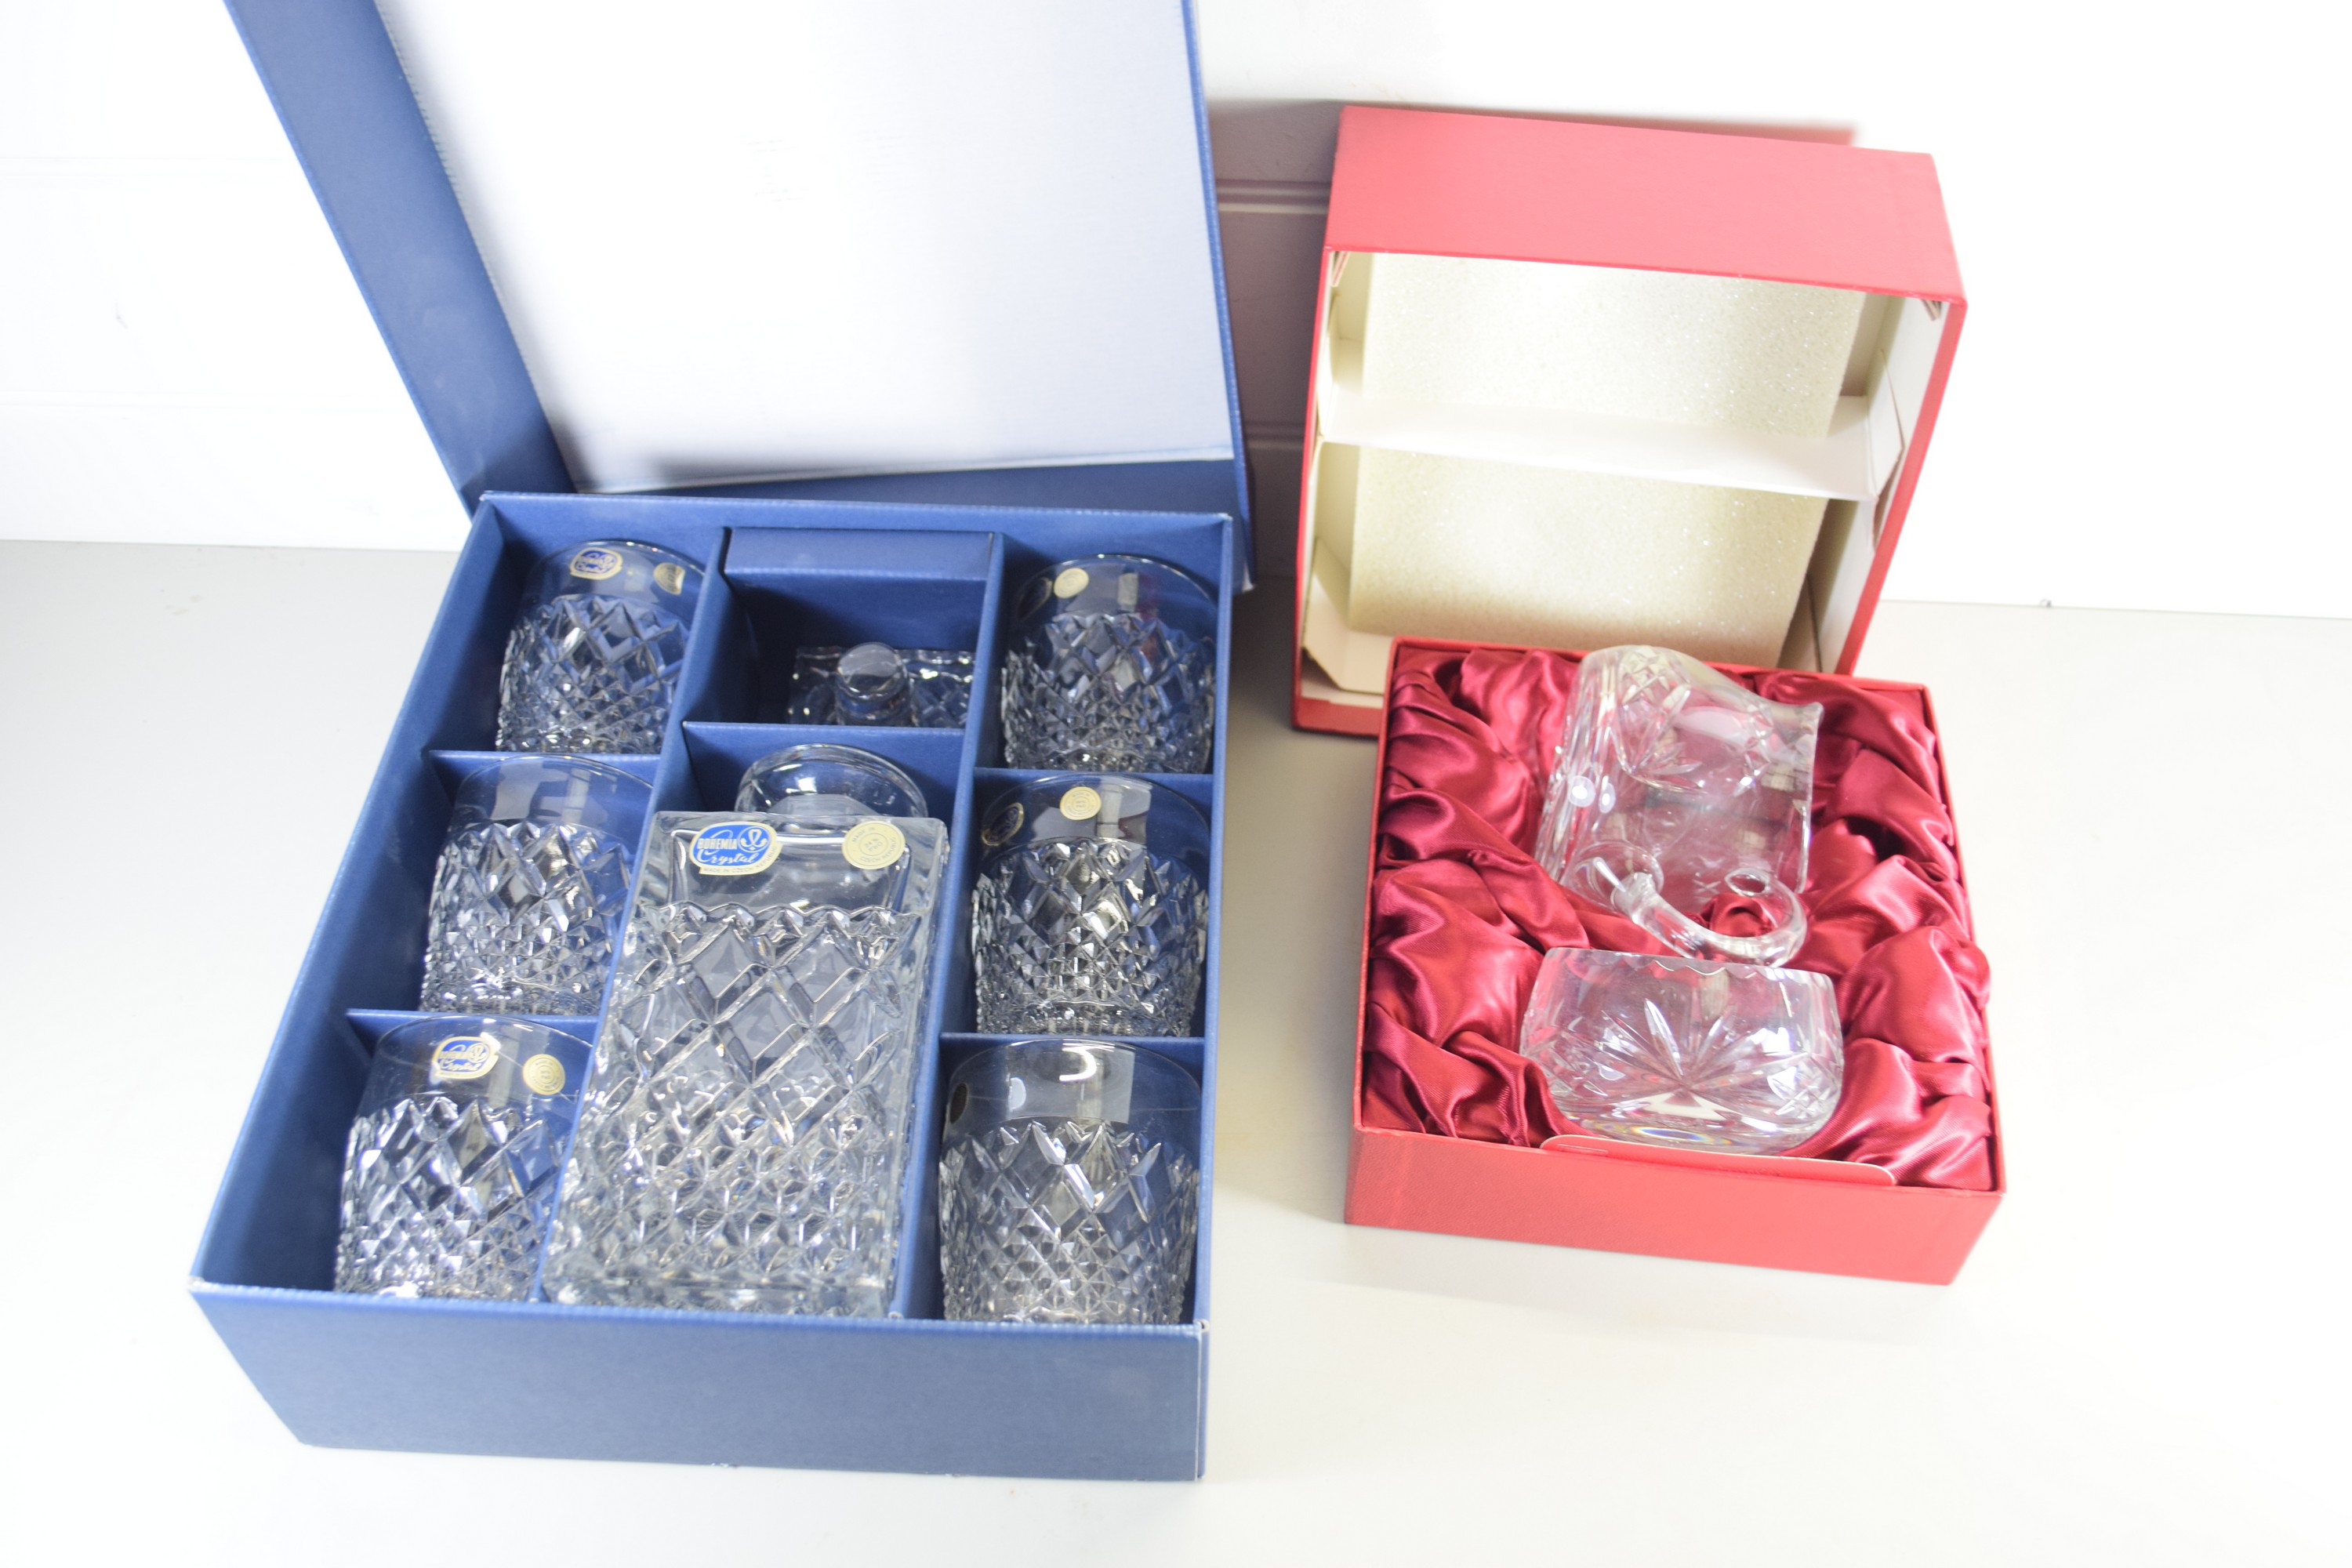 CONTINENTAL CUT GLASS JUG AND BOWL IN BOX PLUS A BOX CONTAINING BOHEMIA CRYSTAL CUT GLASS DECANTER - Image 2 of 2